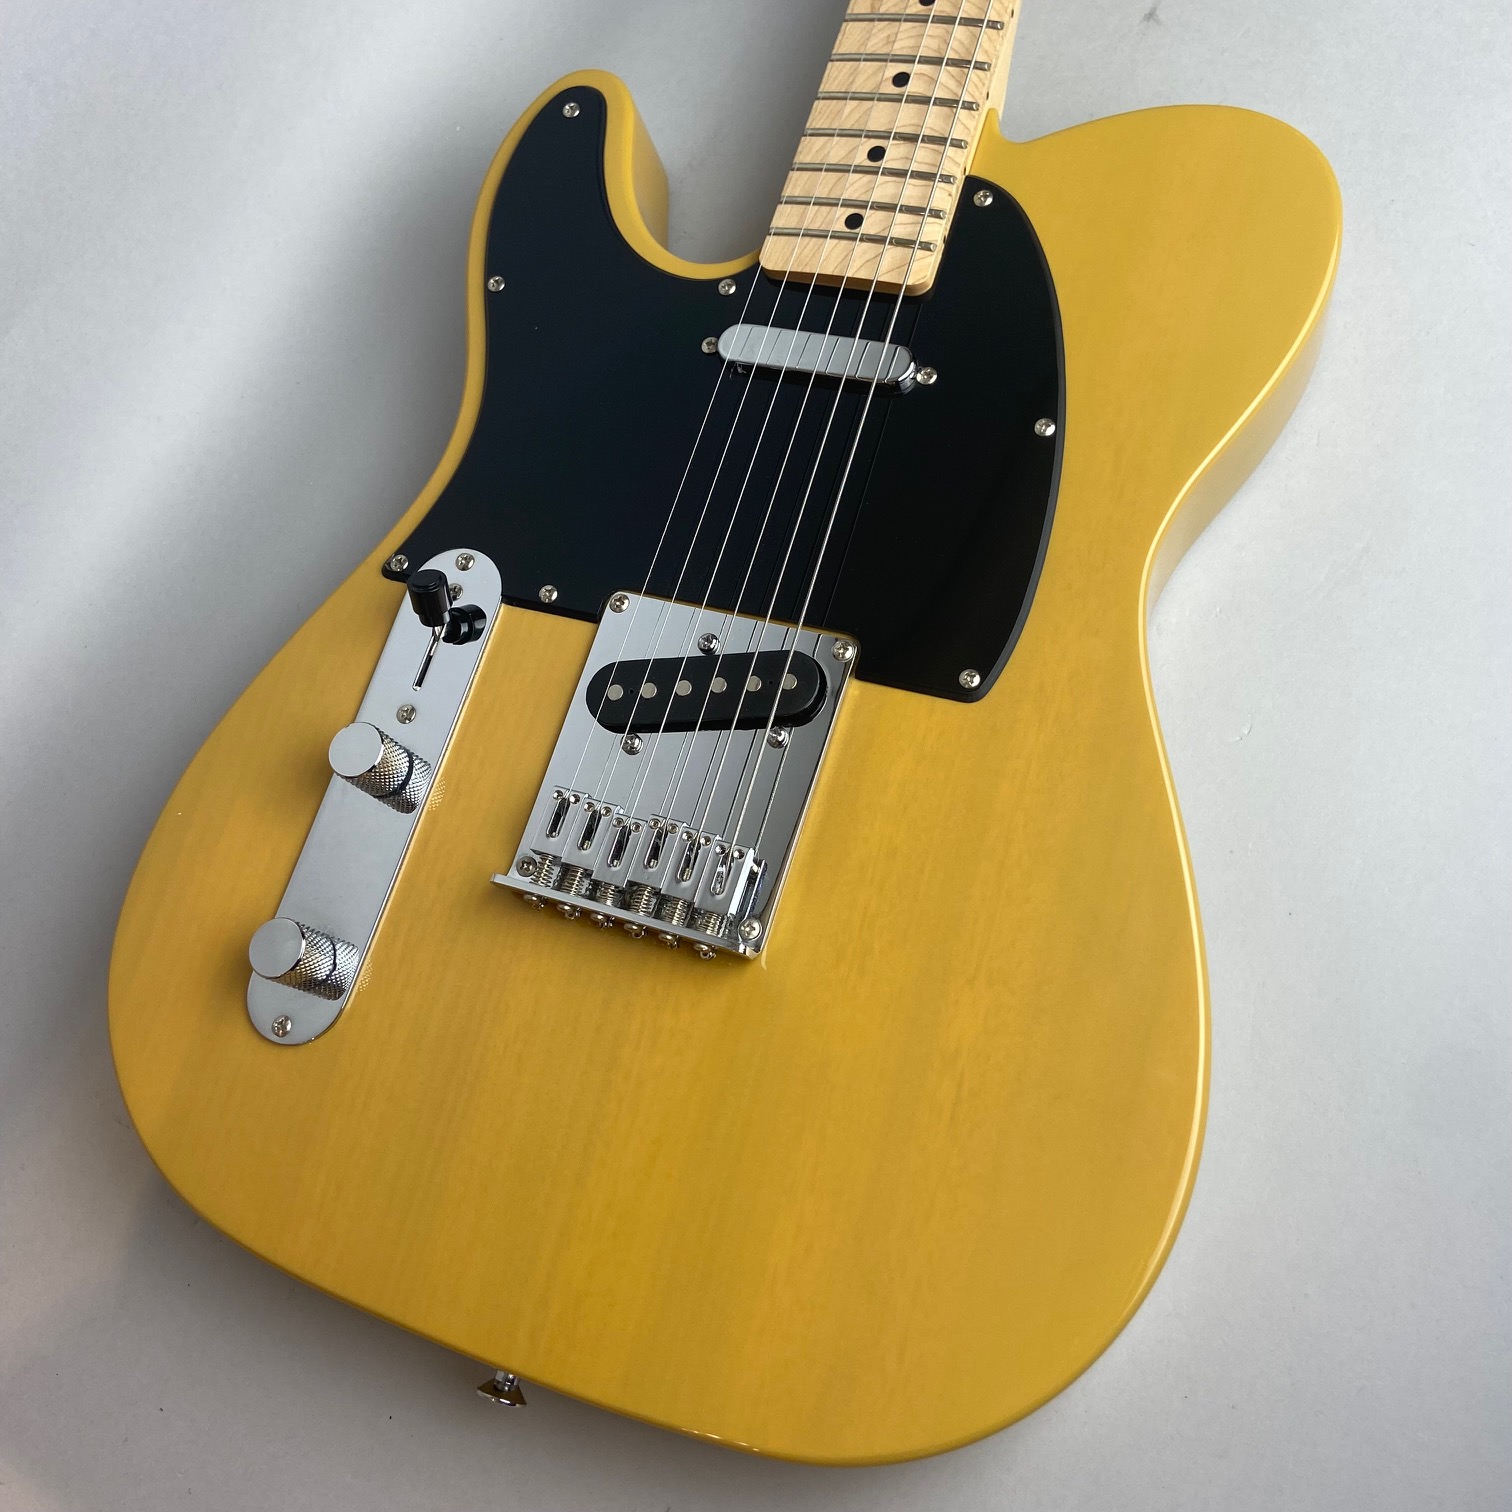 Squier by Fender Affinity Series Telecaster Left Hand レフティ